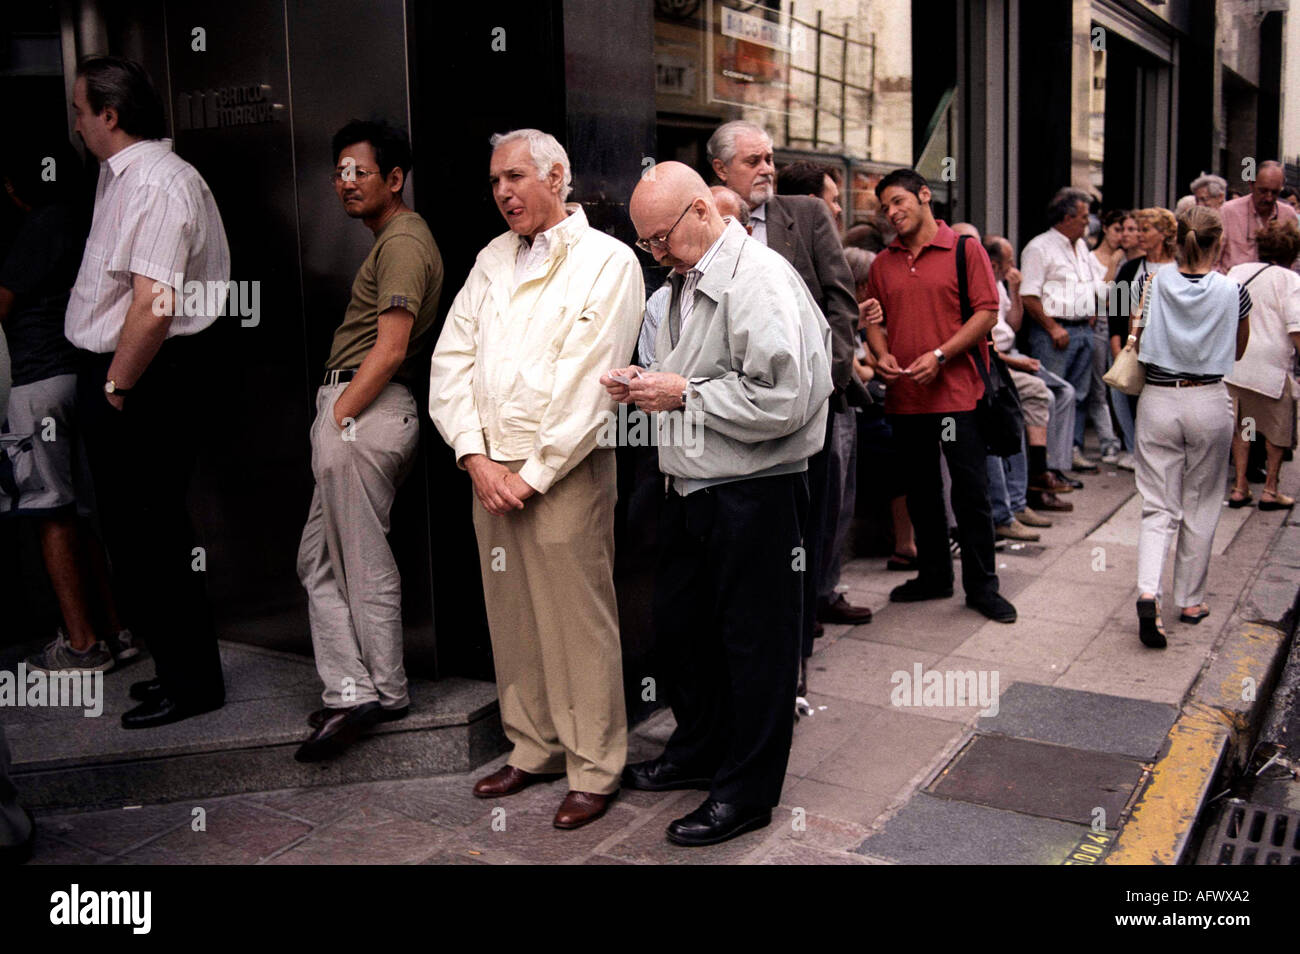 Argentina Inflation 2000s. Economic Crisis in Buenos Aires South America 2002. People queueing to withdraw money, run on the bank.   2000s Stock Photo